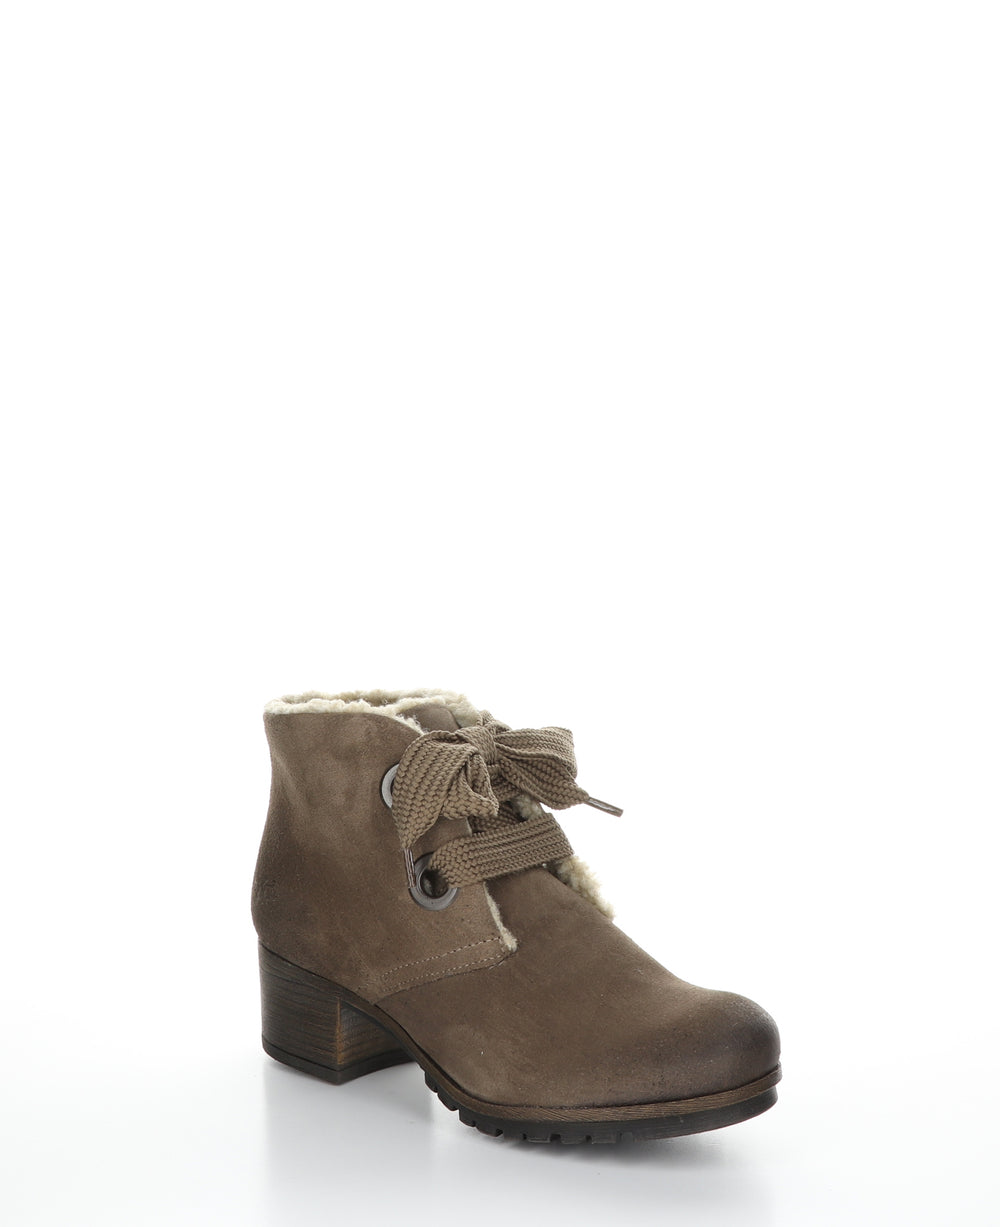 MANX Taupe Round Toe Ankle Boots